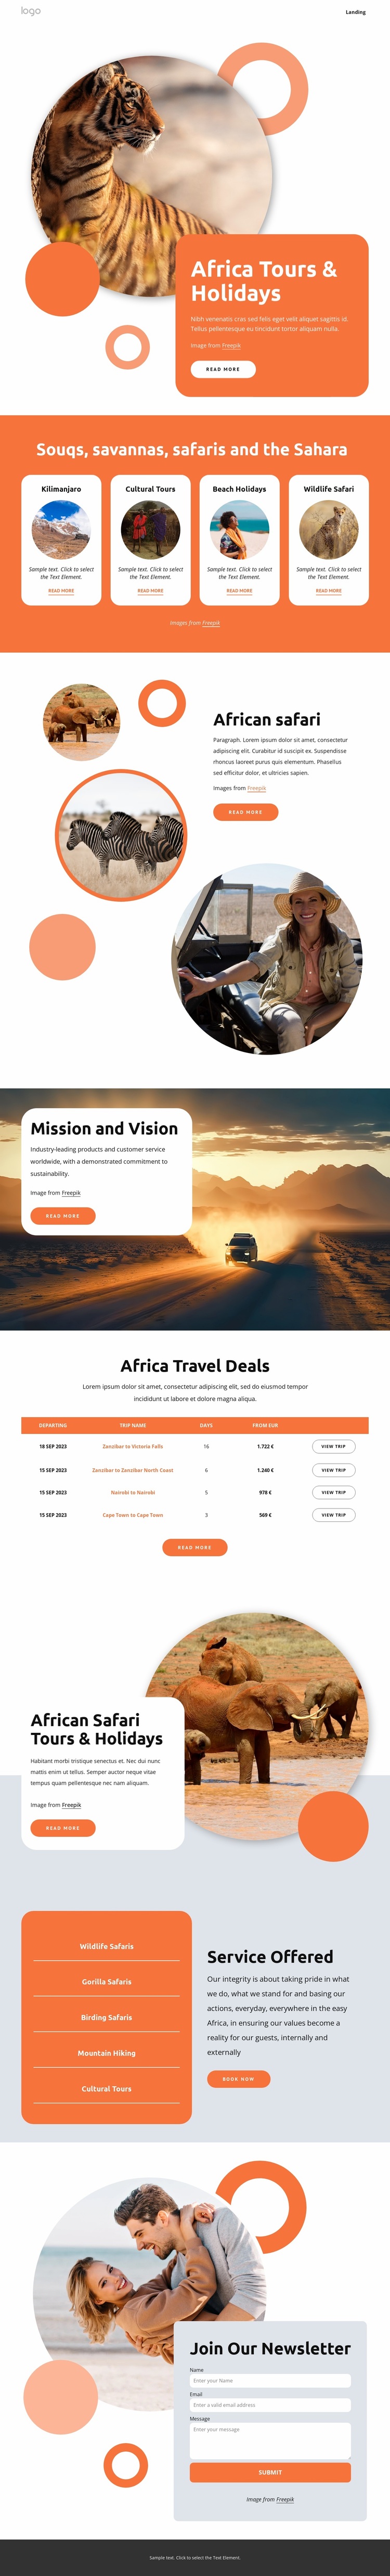 Africa tours and holidays Website Design